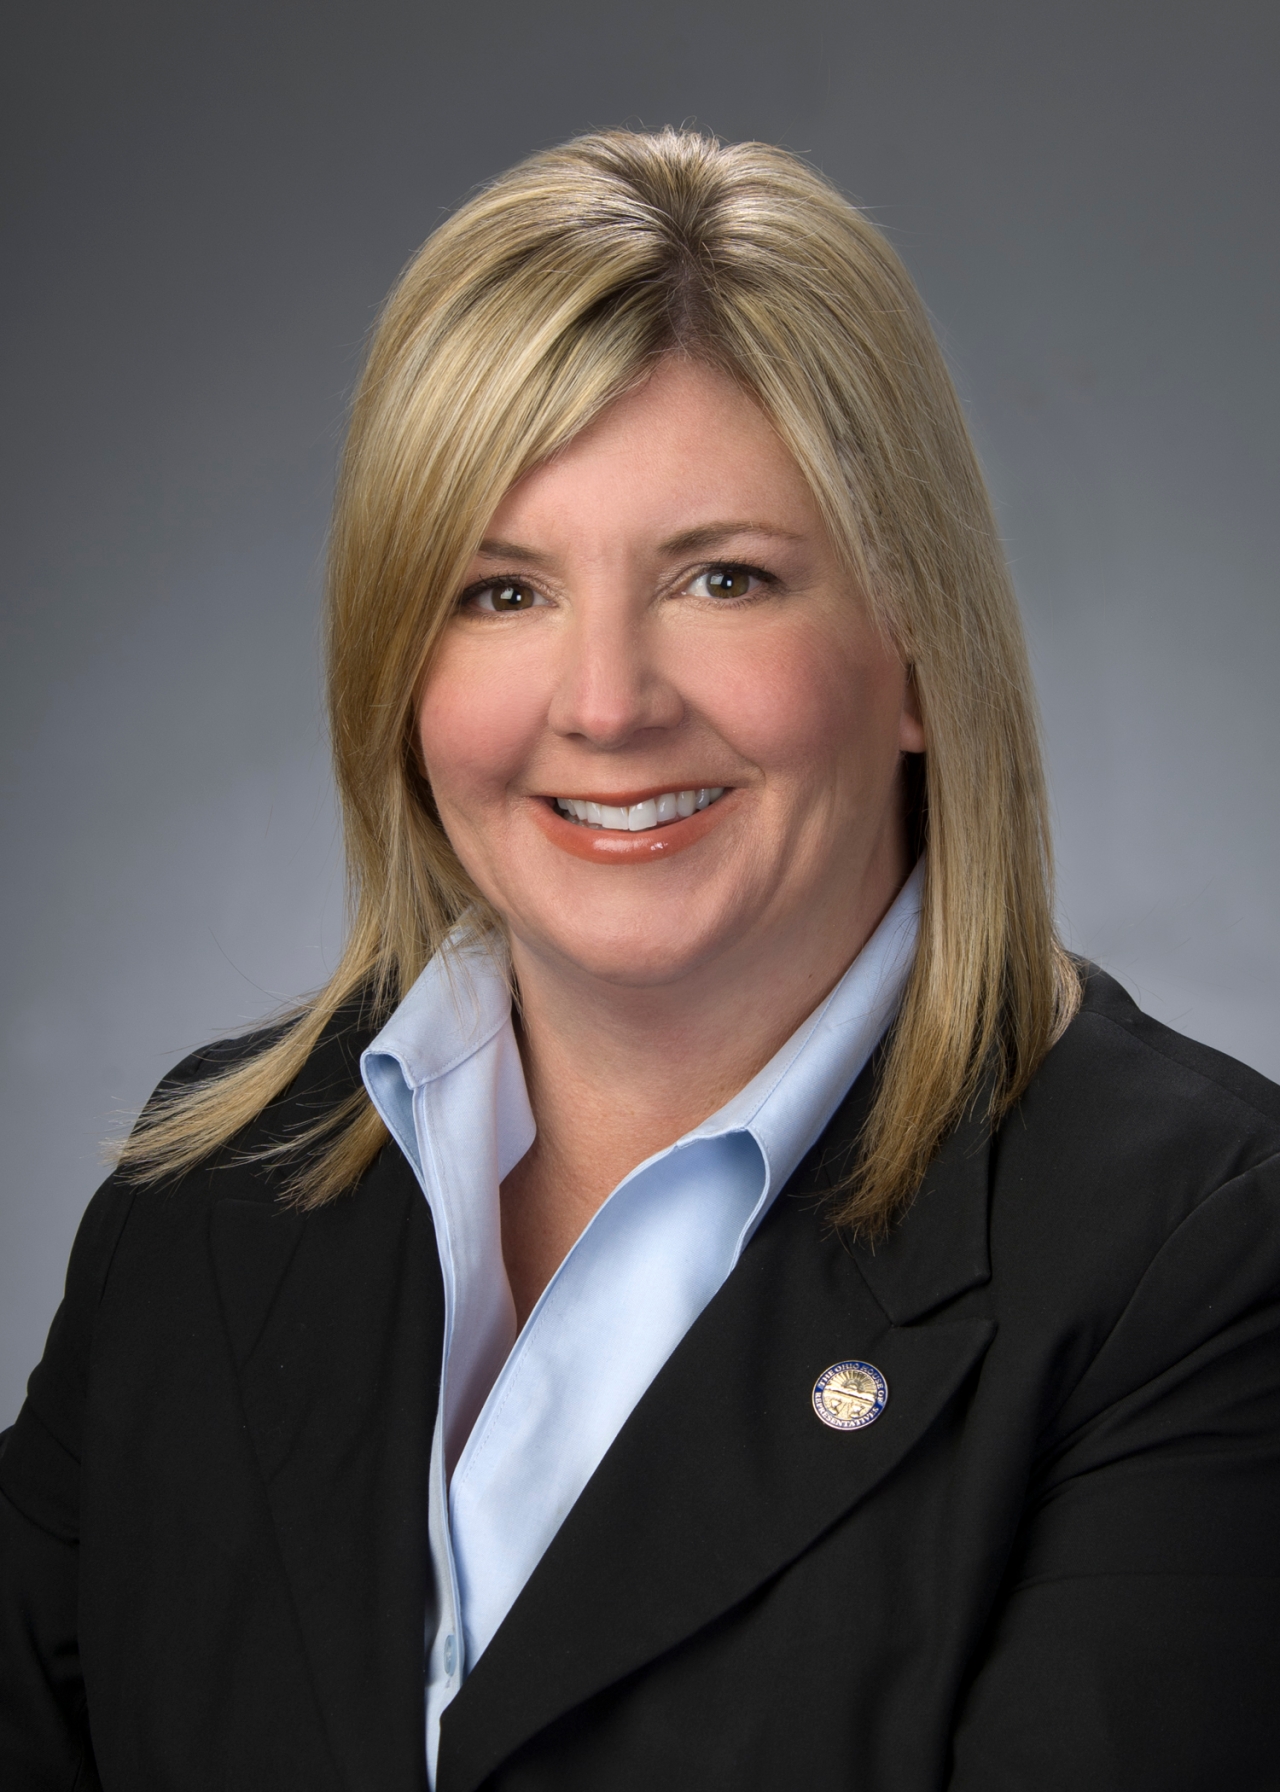 State Rep. Kunze Appointed to Ohio's Commission on Infant Mortality